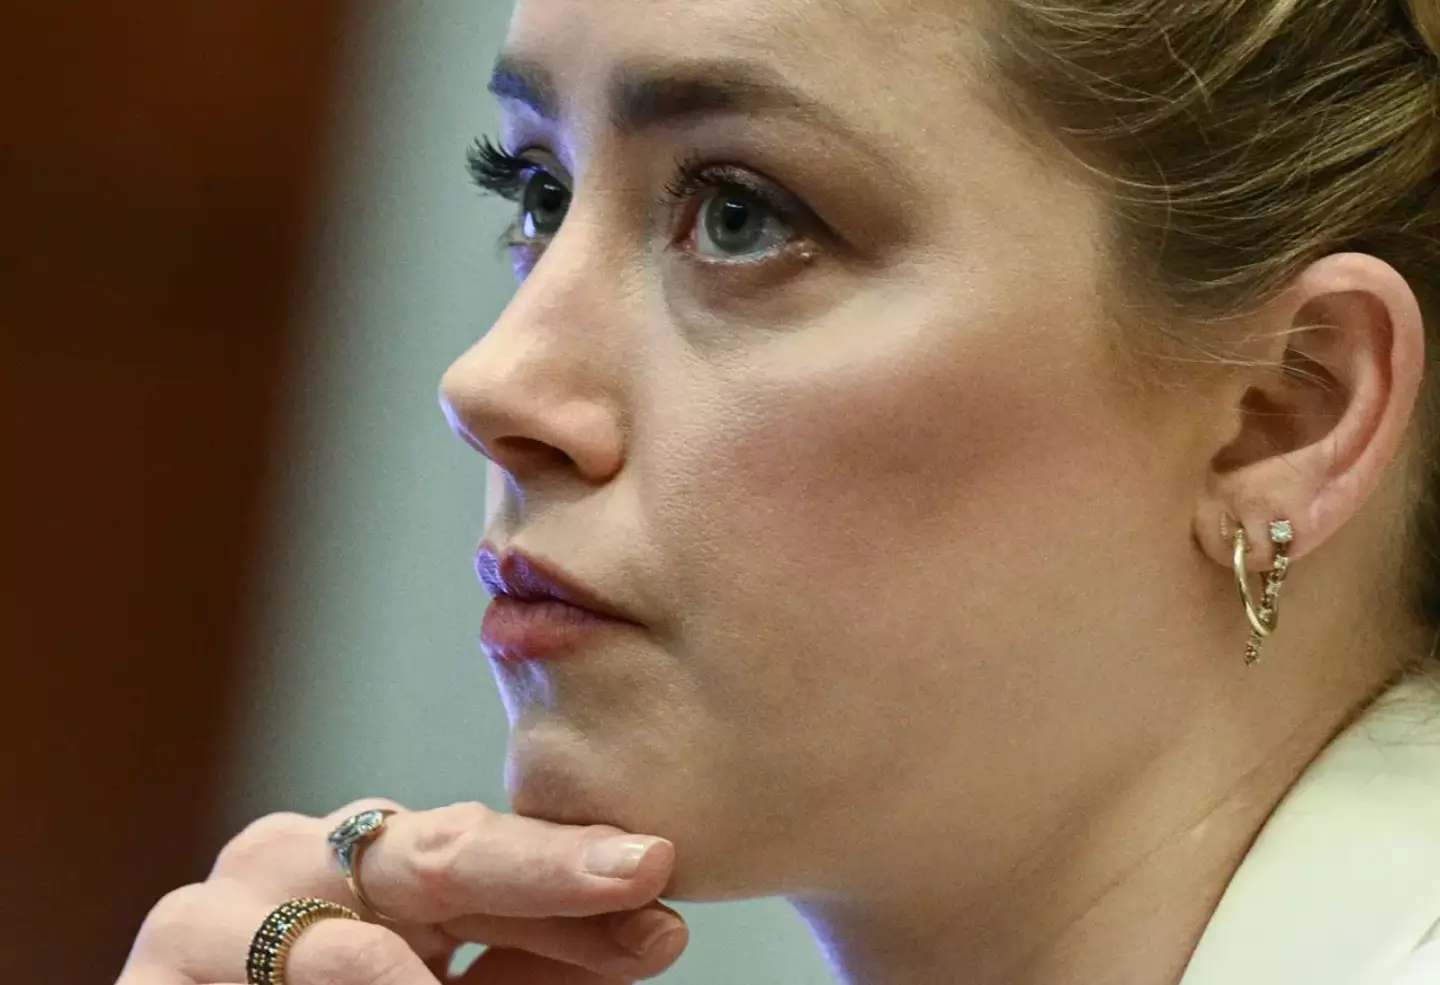 Amber Heard has discussed the negative social media coverage she has faced.